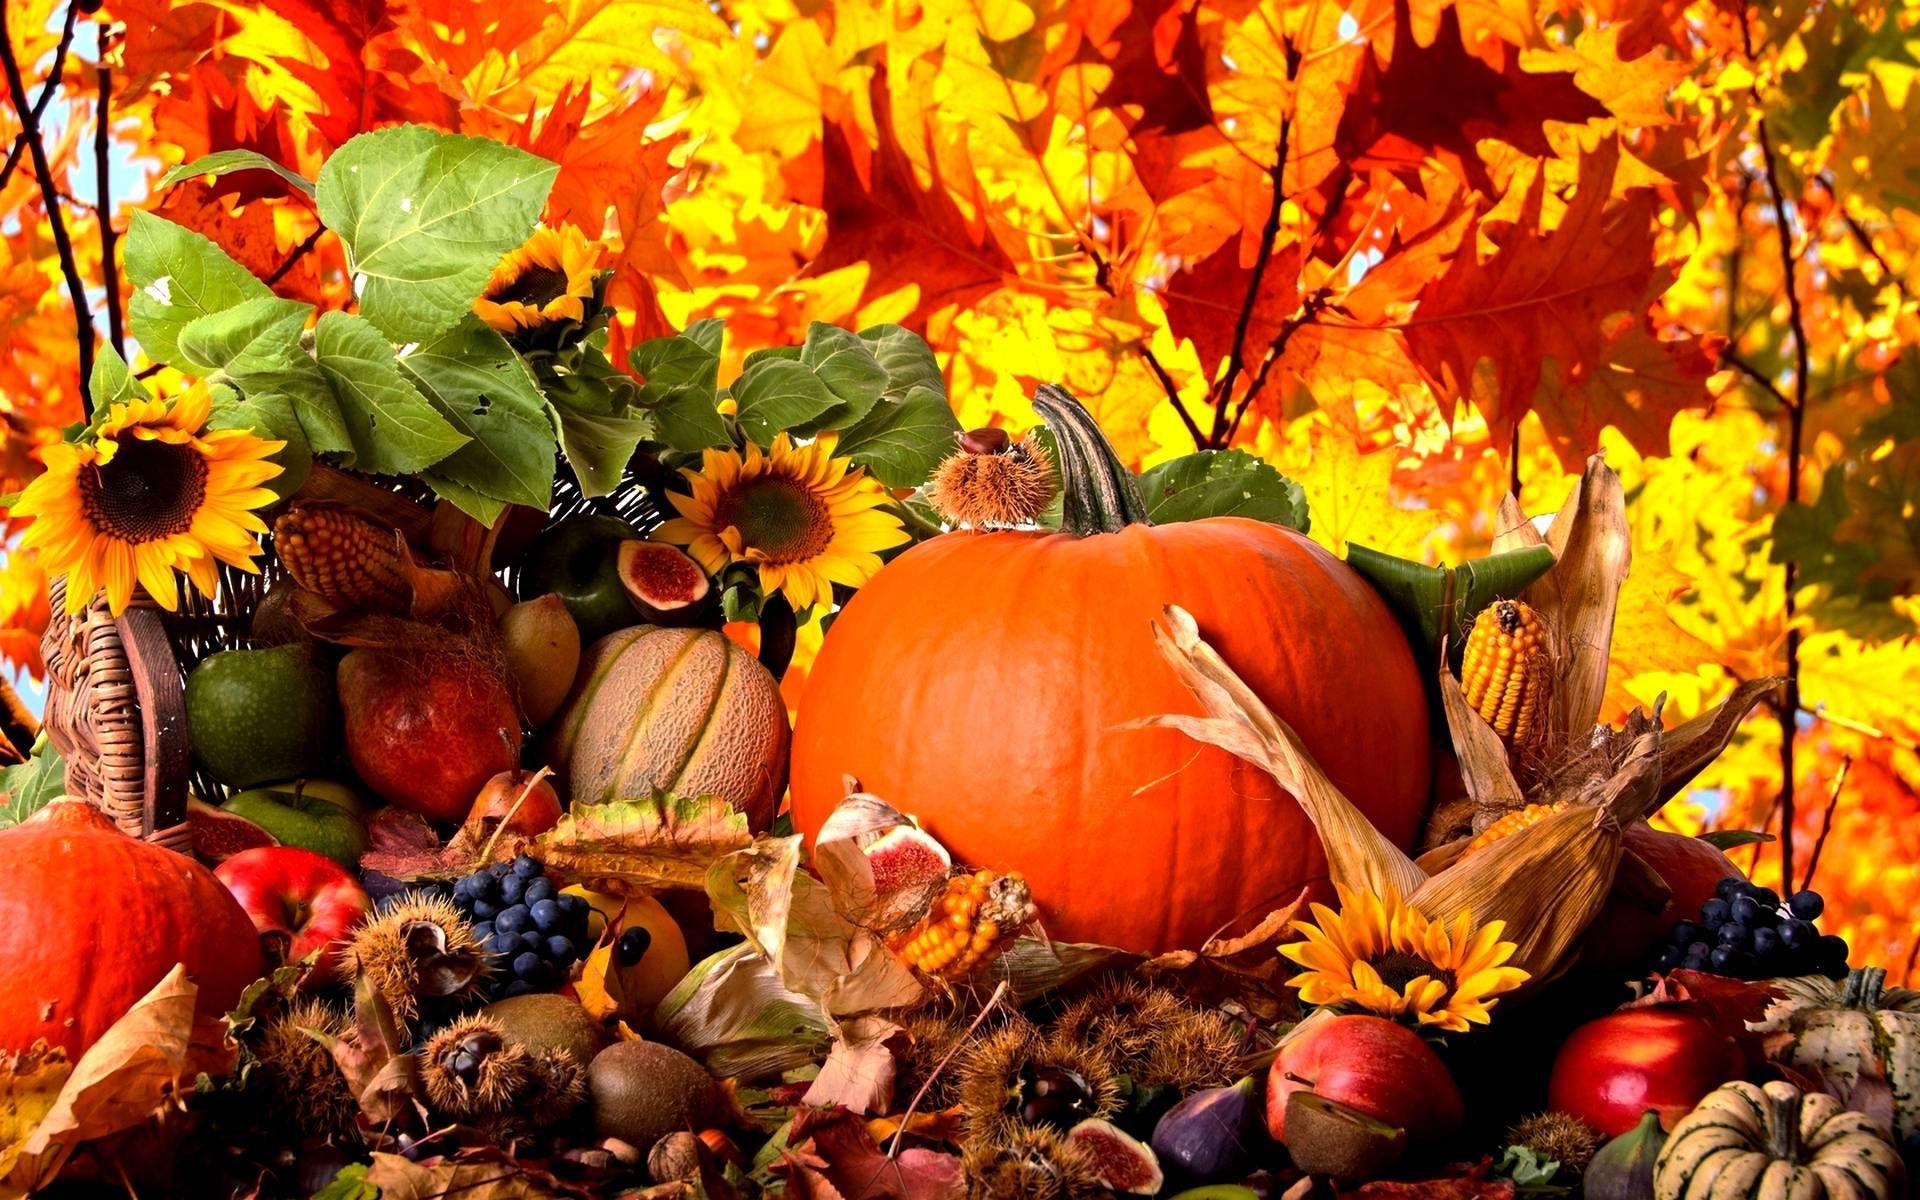 Download Fall Harvest Wallpaper High Quality for iphone, pc desktop, android, or mac. Thanksgiving wallpaper, Free thanksgiving wallpaper, Thanksgiving background